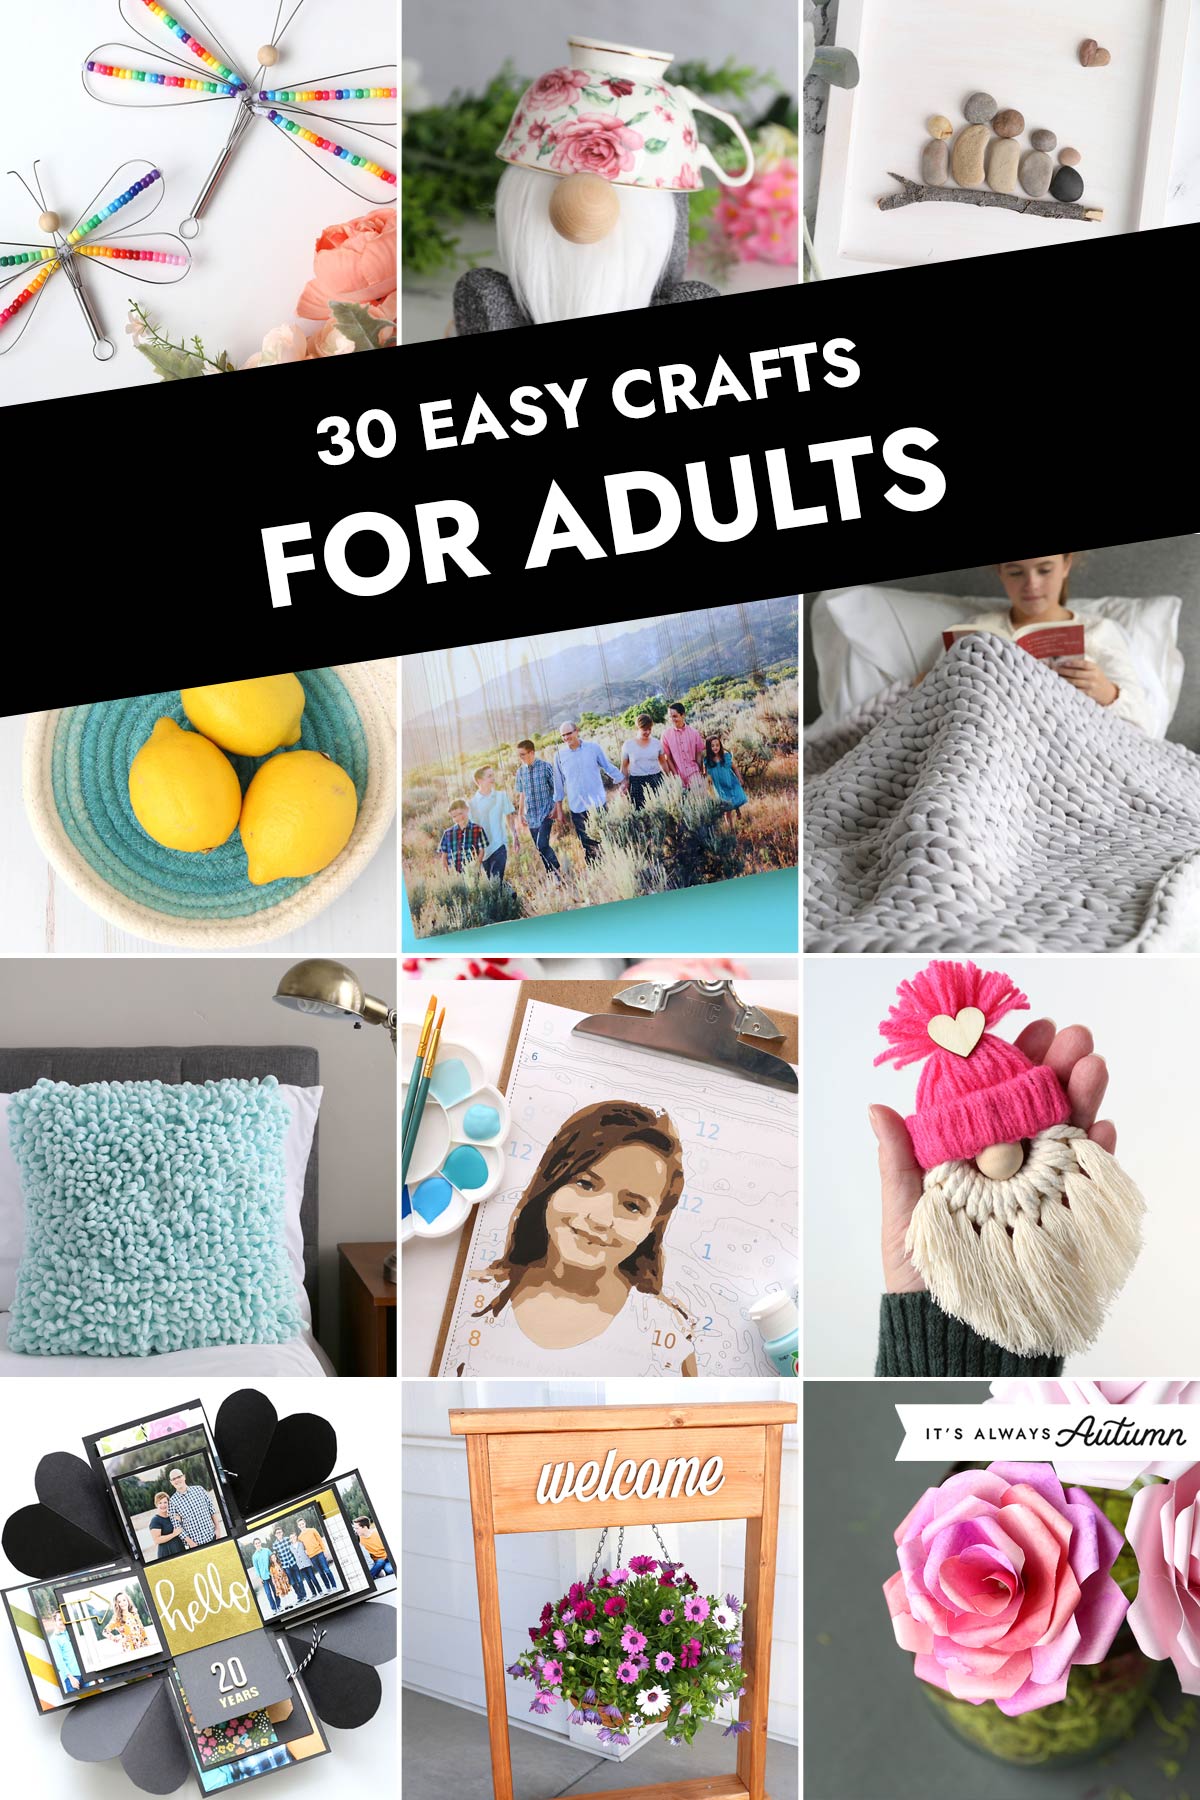 Pin on DIY Craft Projects